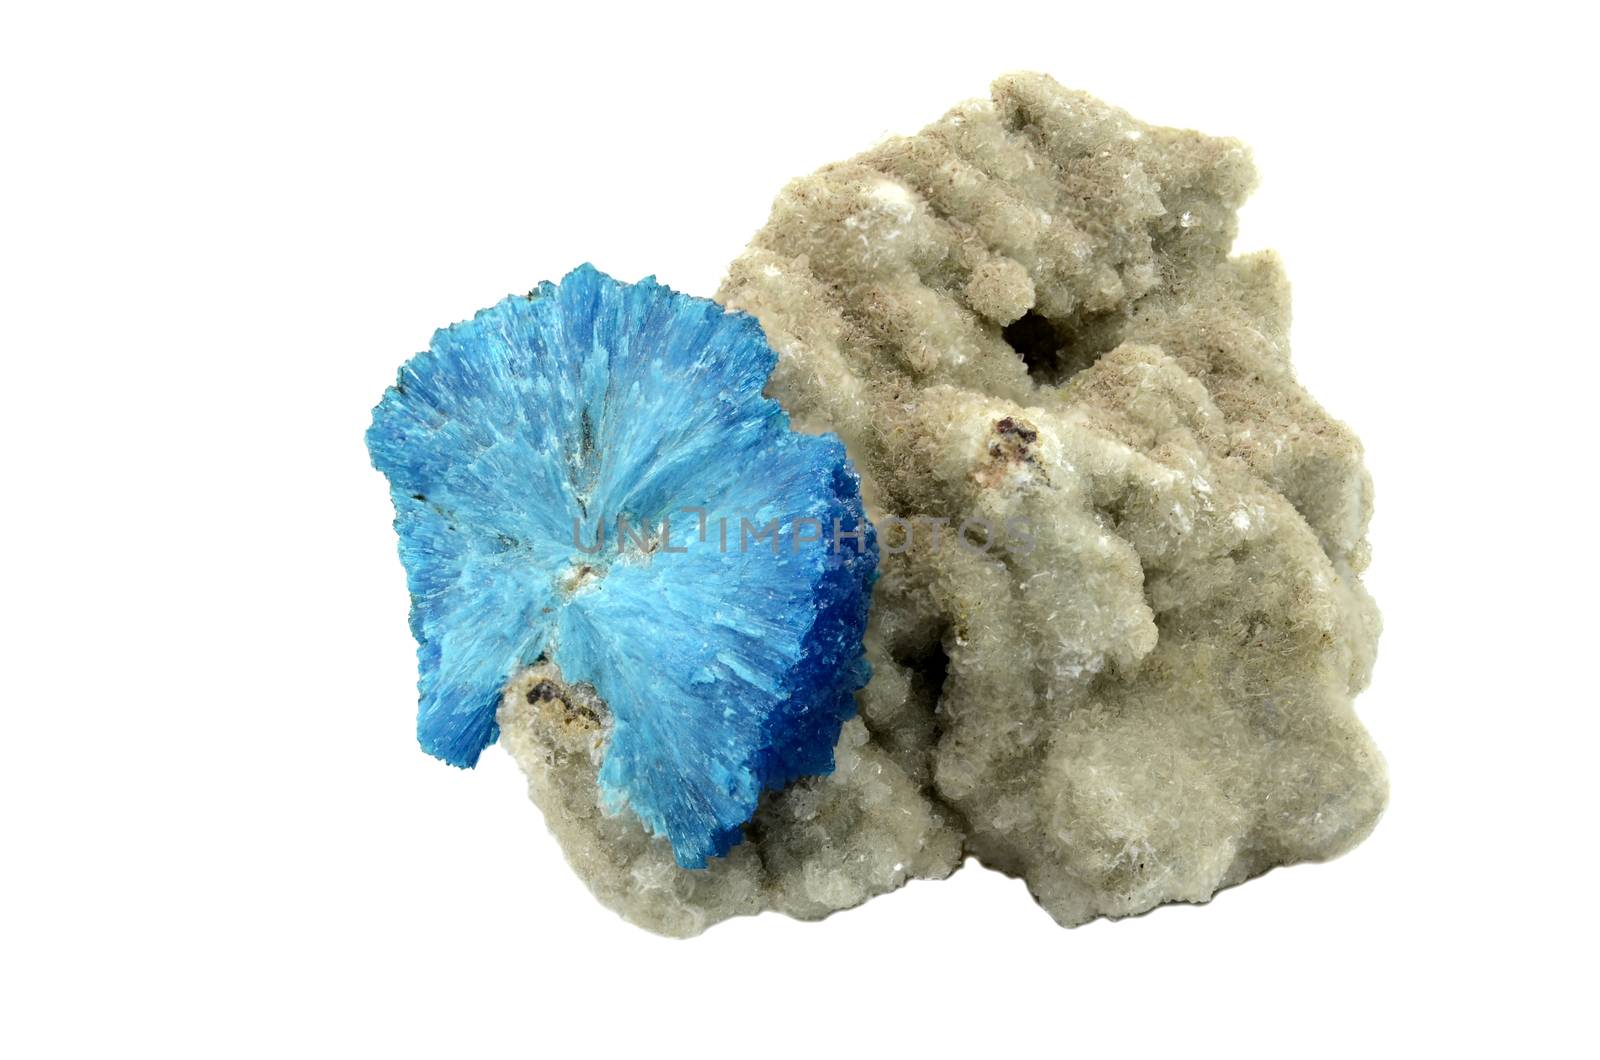 Sample of  Cavansite a beautiful nature specimen isolated on white background